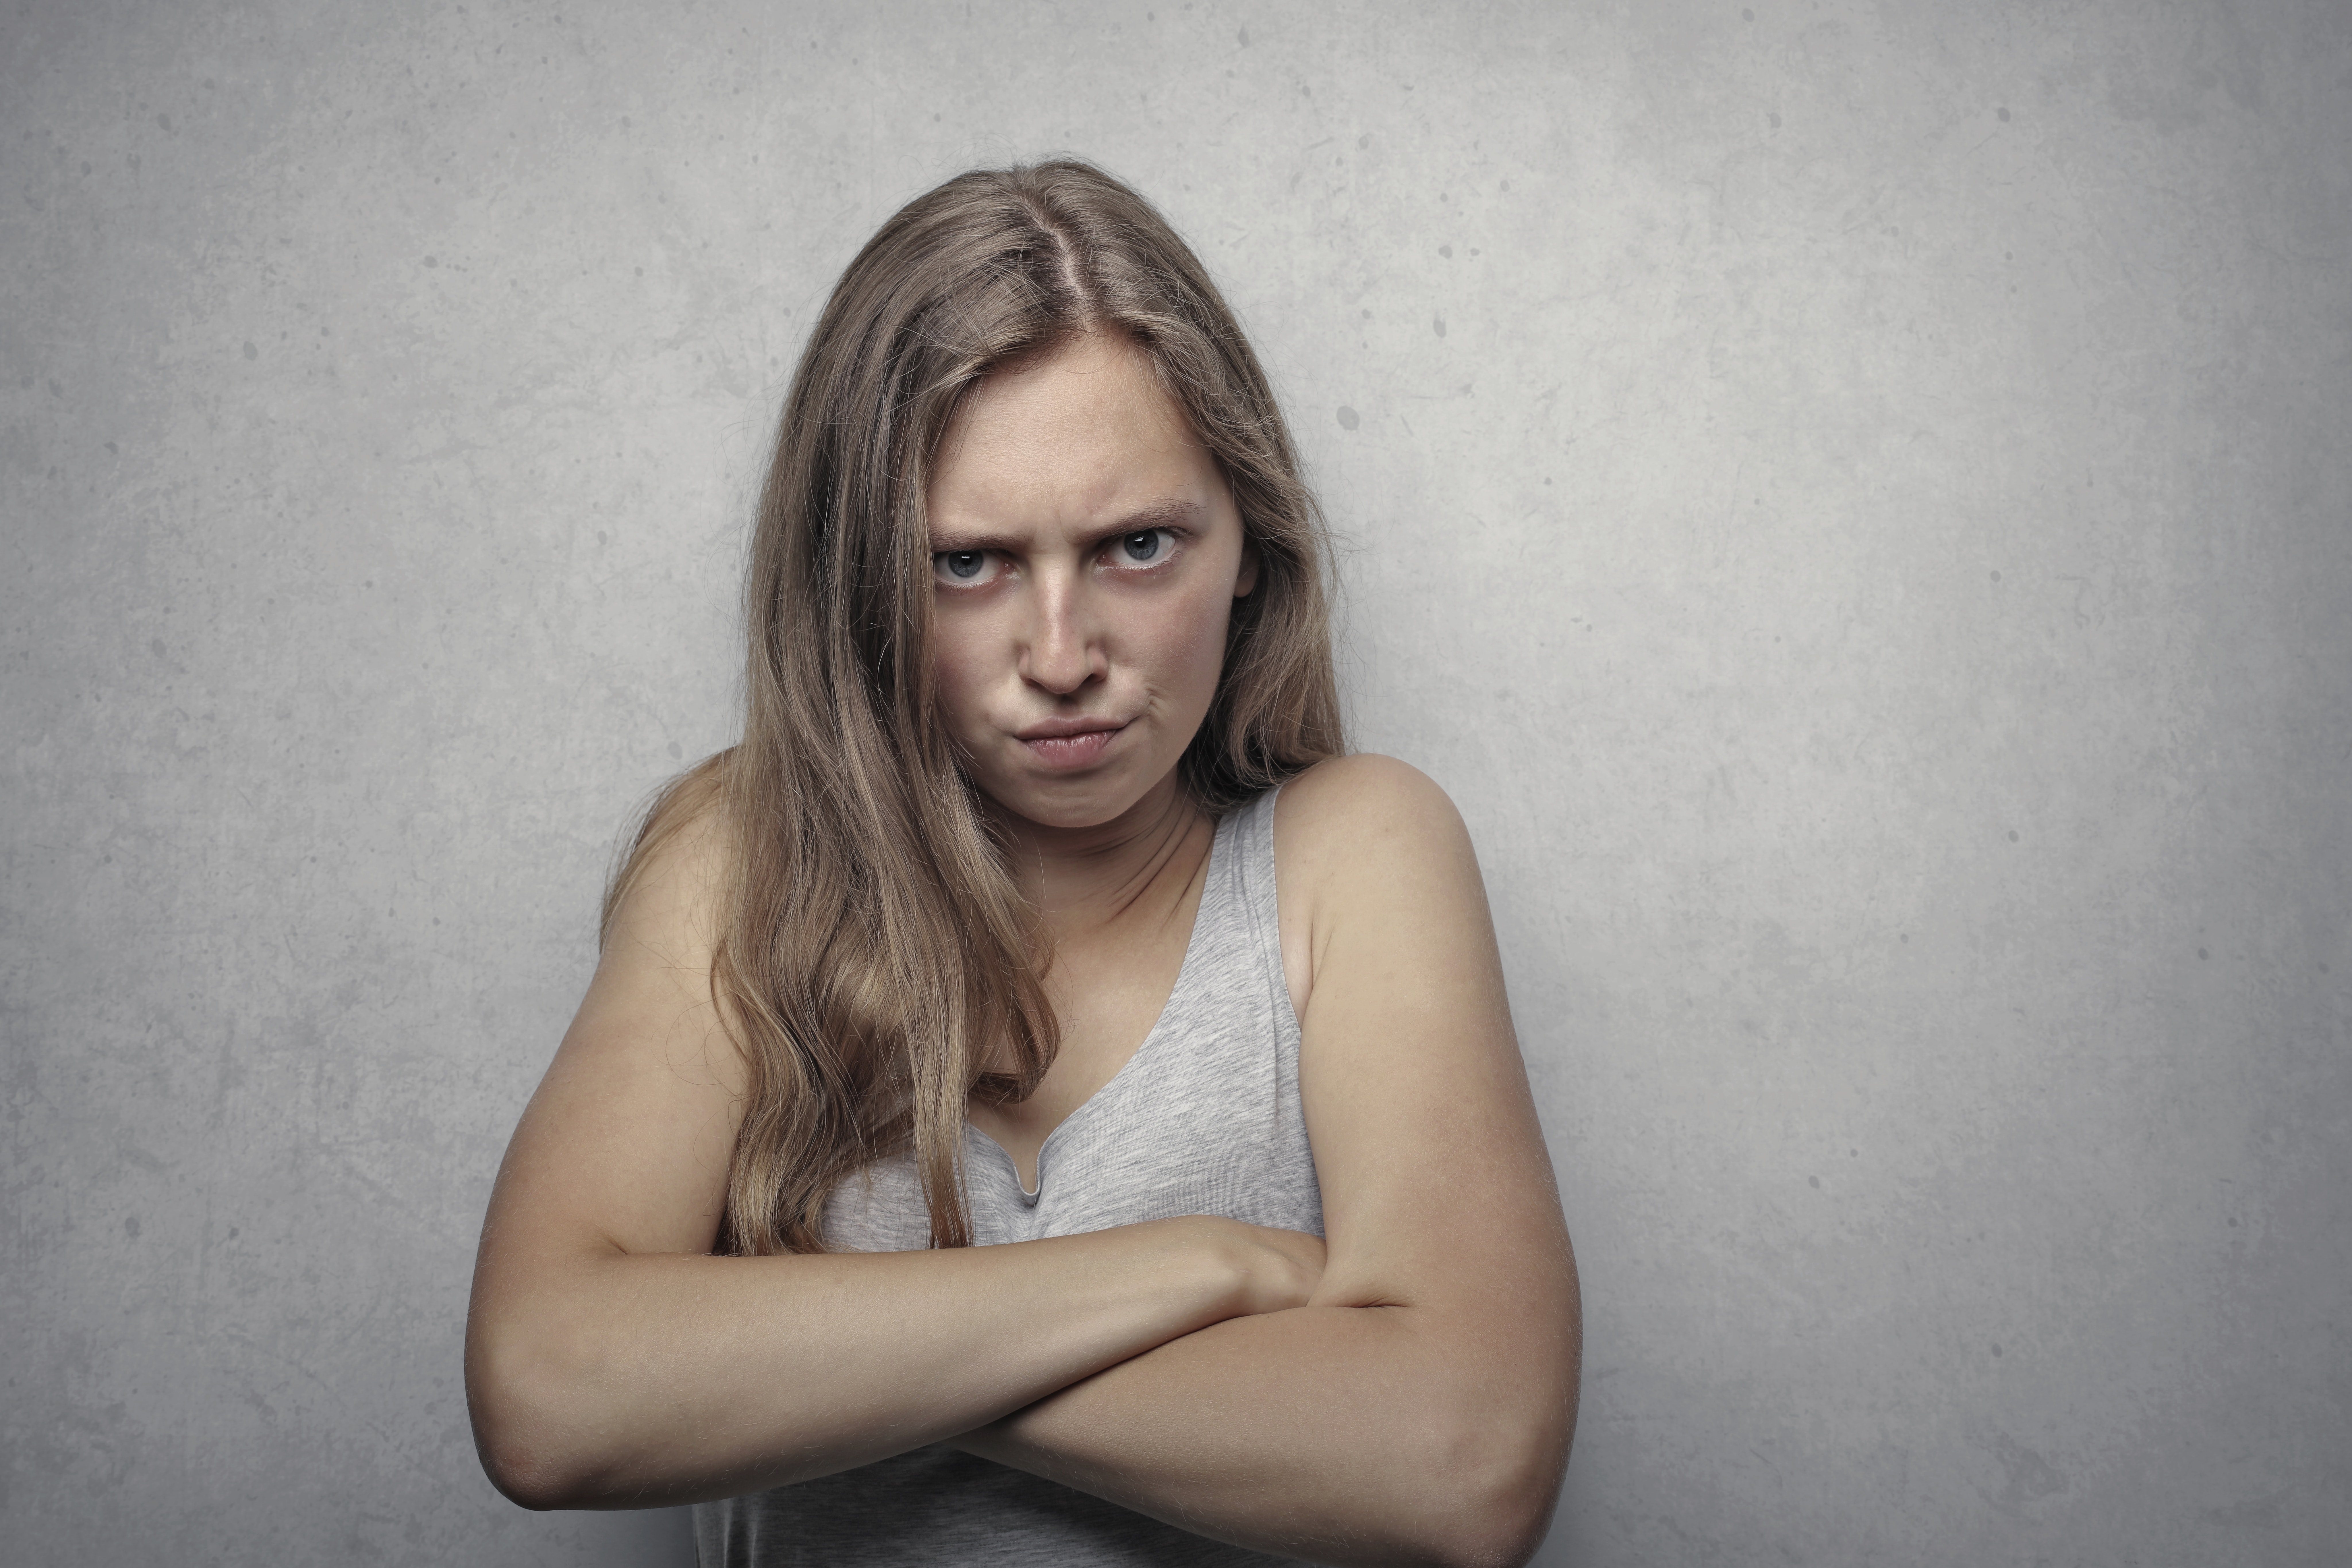 An angry woman with their arms crossed. │Source: Pexels